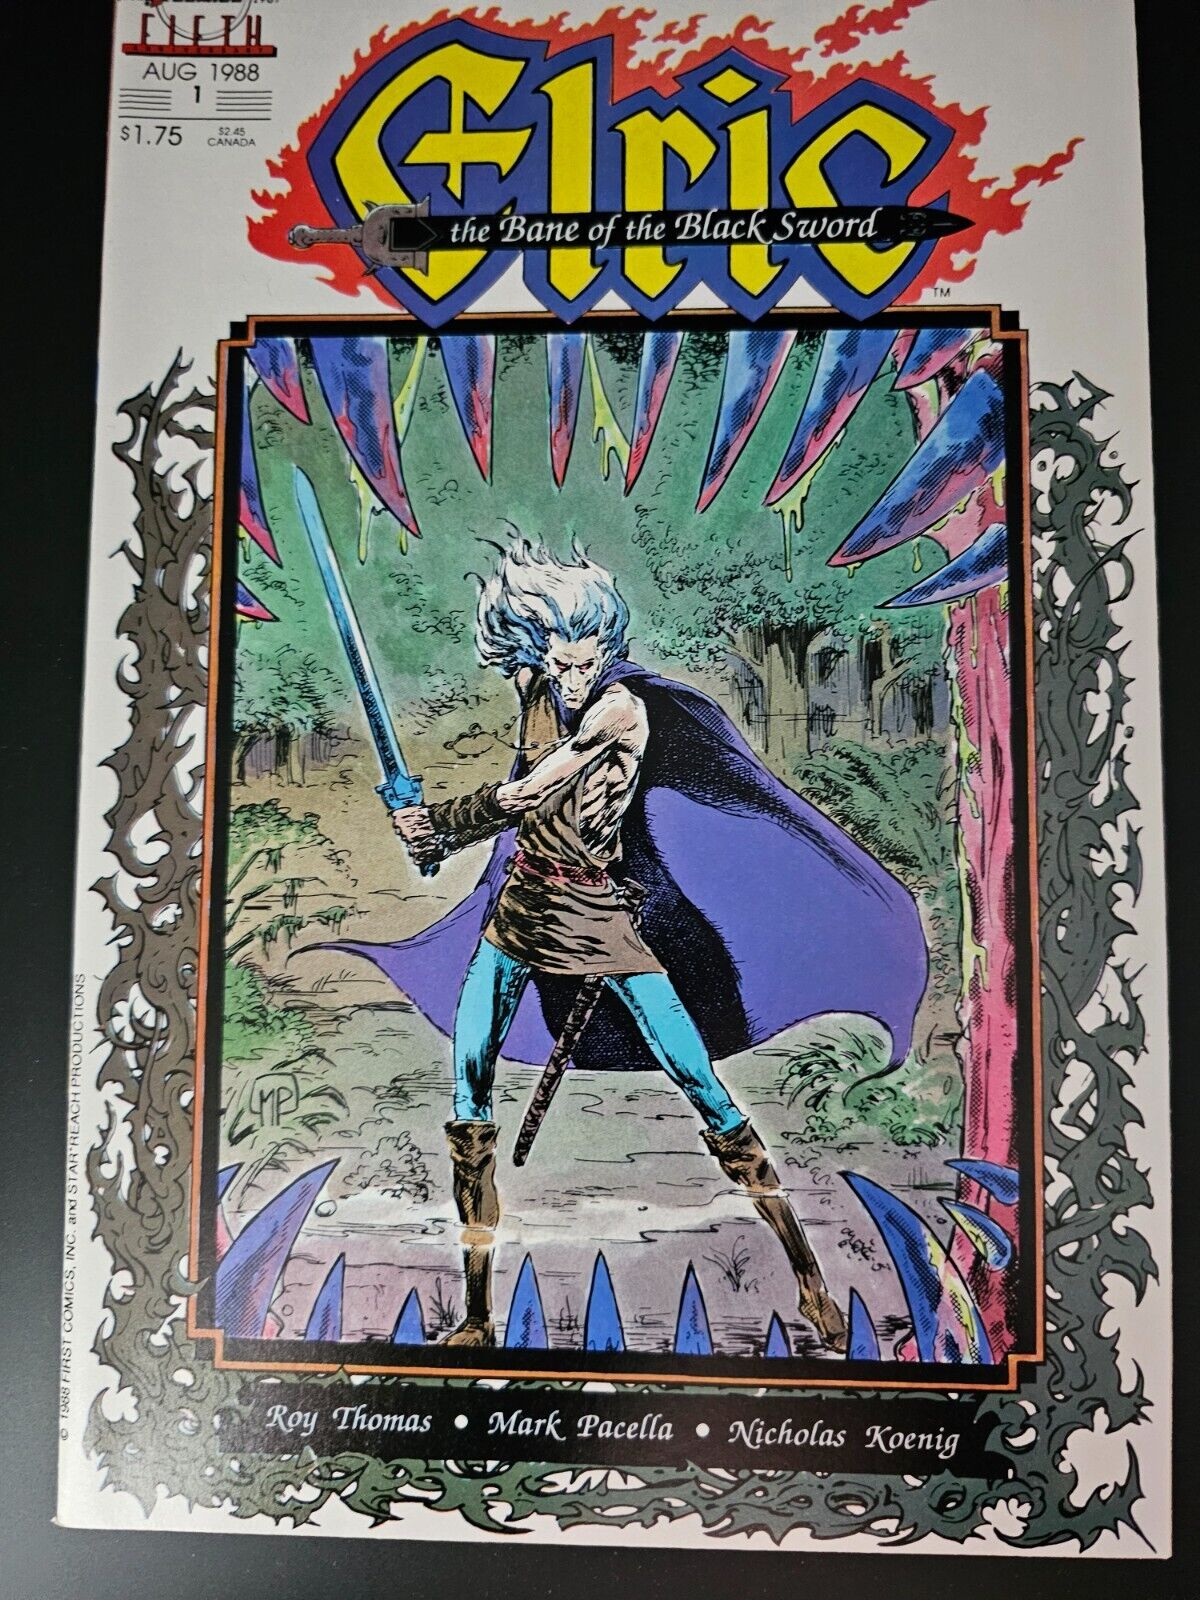 Michael Moorcock's ELRIC The Bane of the Black Sword #1 1988